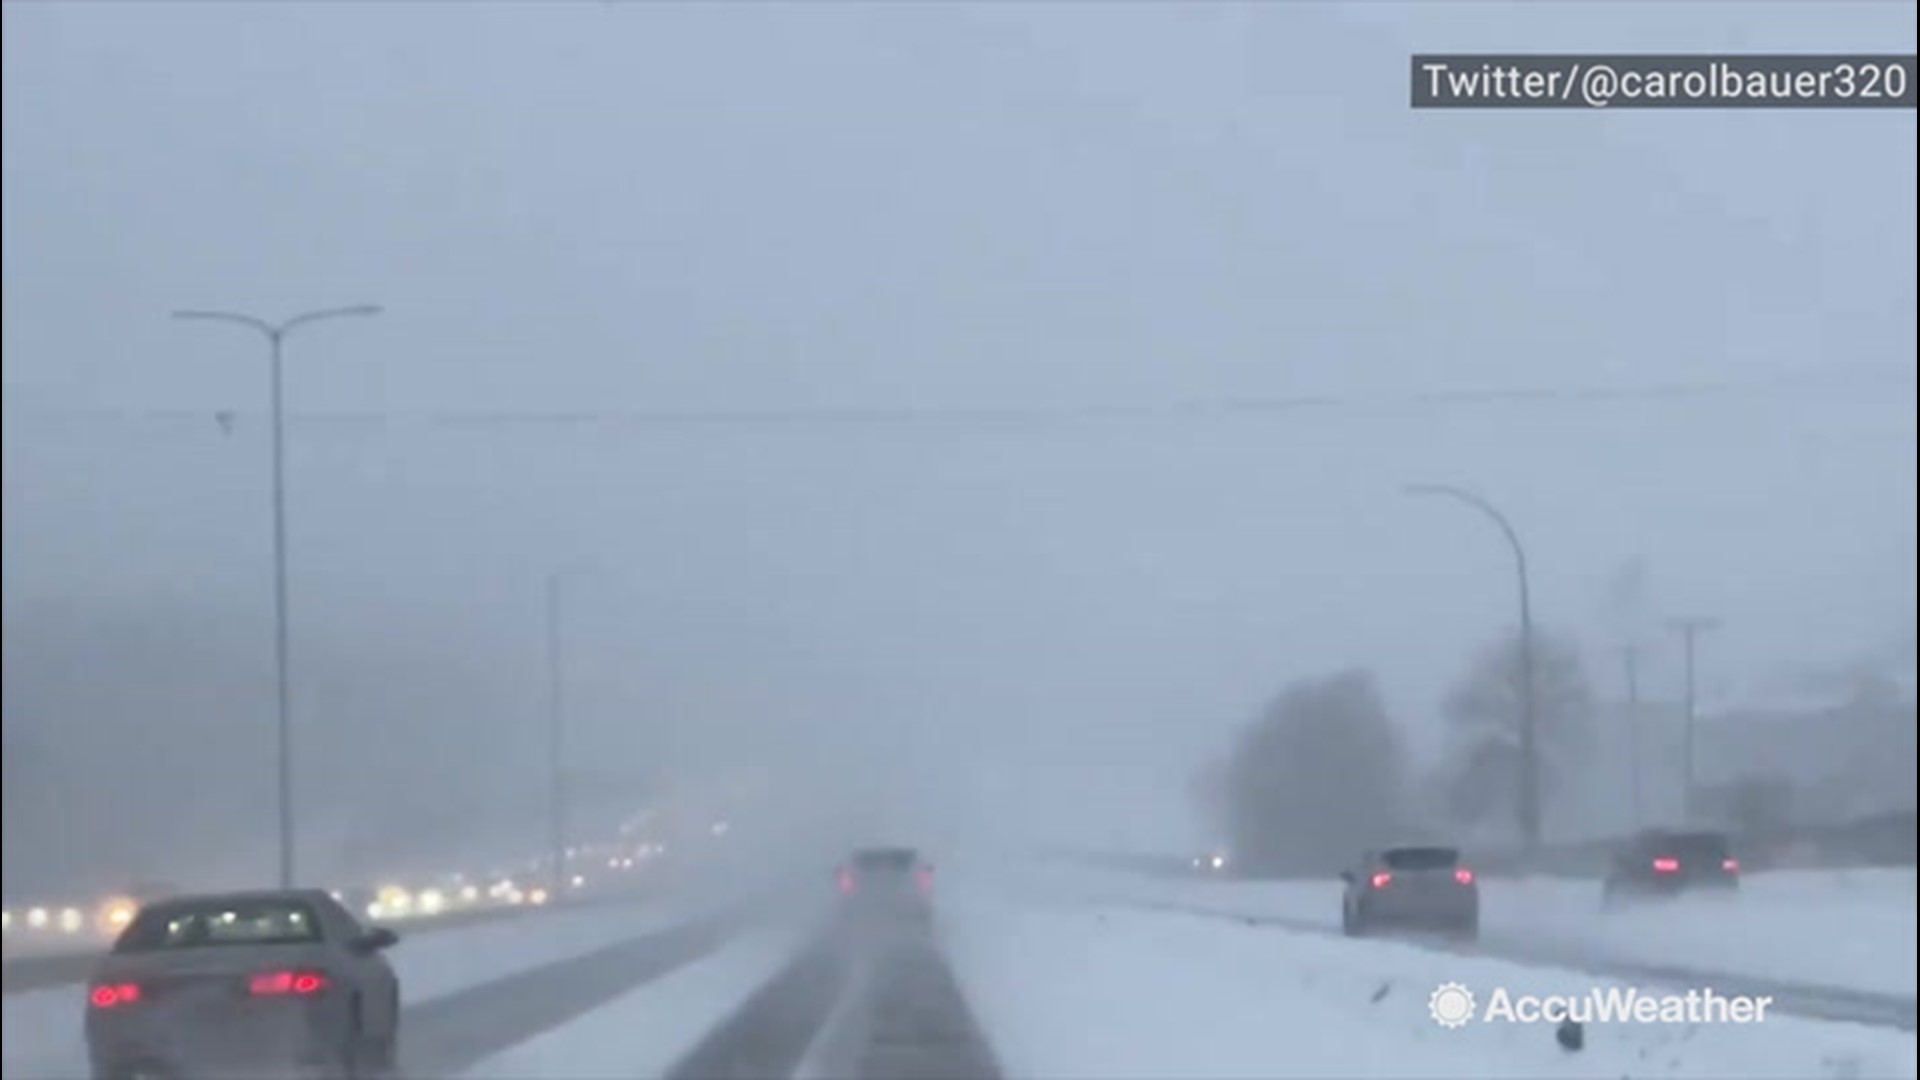 On Monday morning, Dec. 9, snow plagued the roads of Minneapolis, Minnesota.